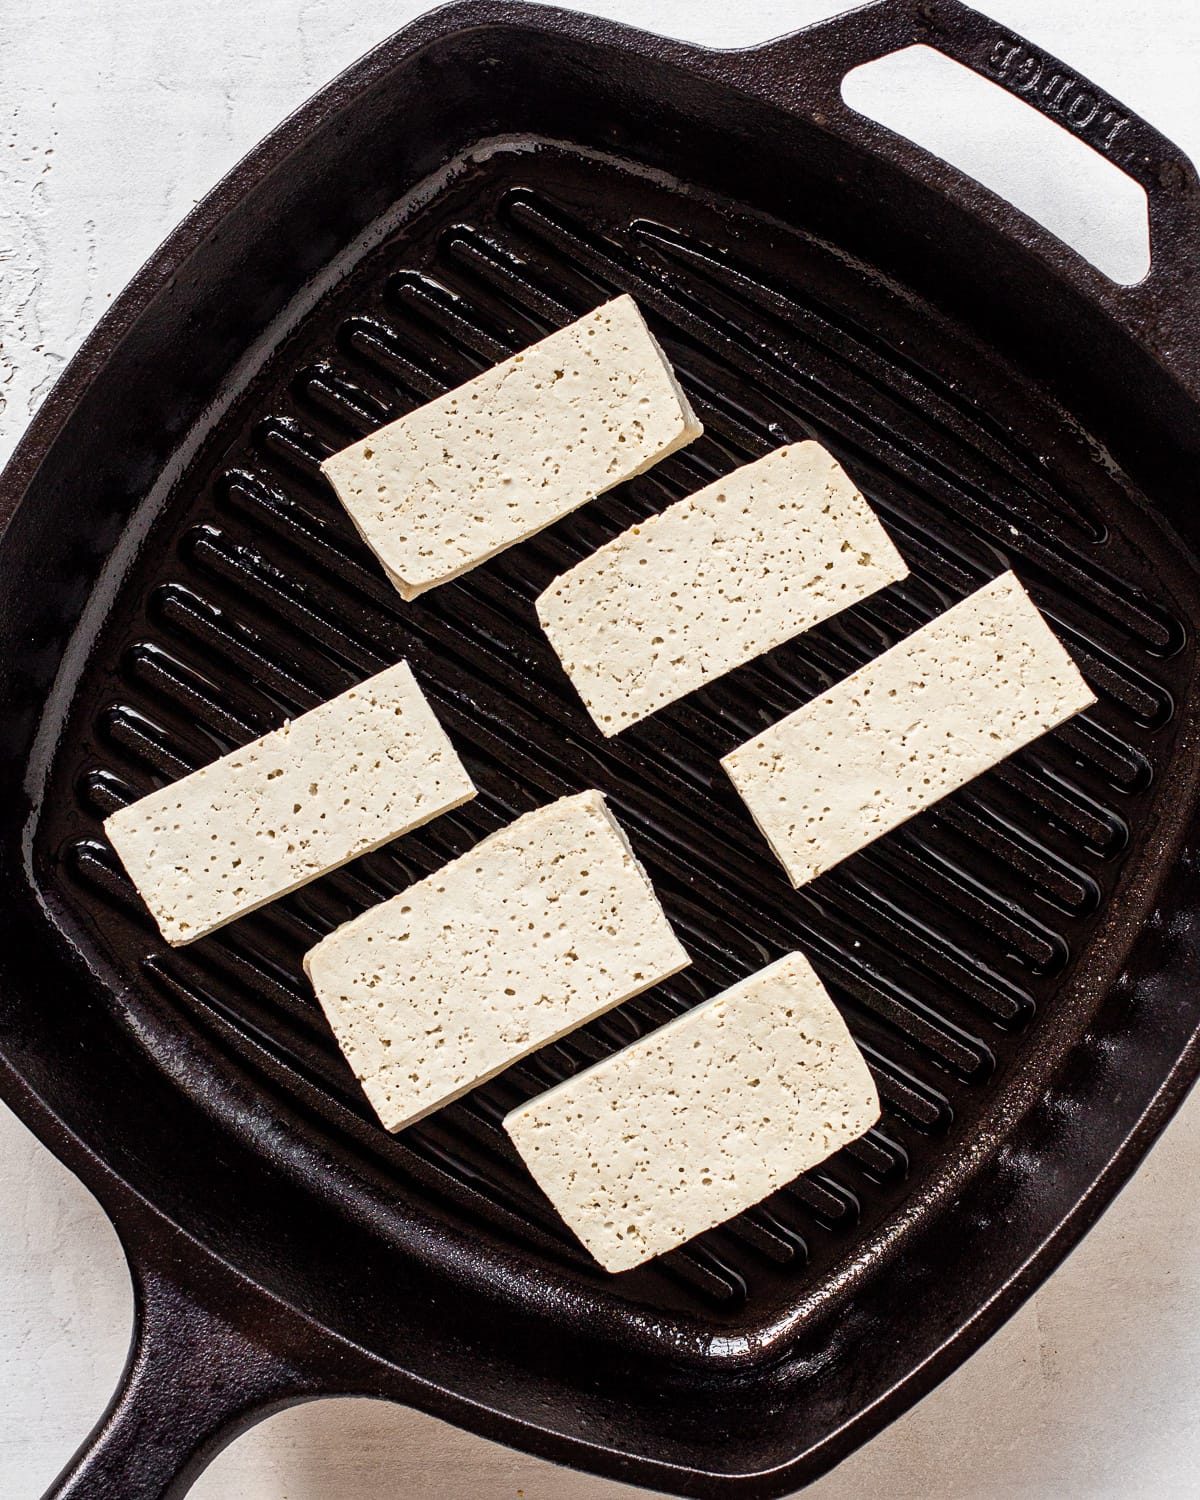 Six pieces of tofu in a greased cast iron grill pan.